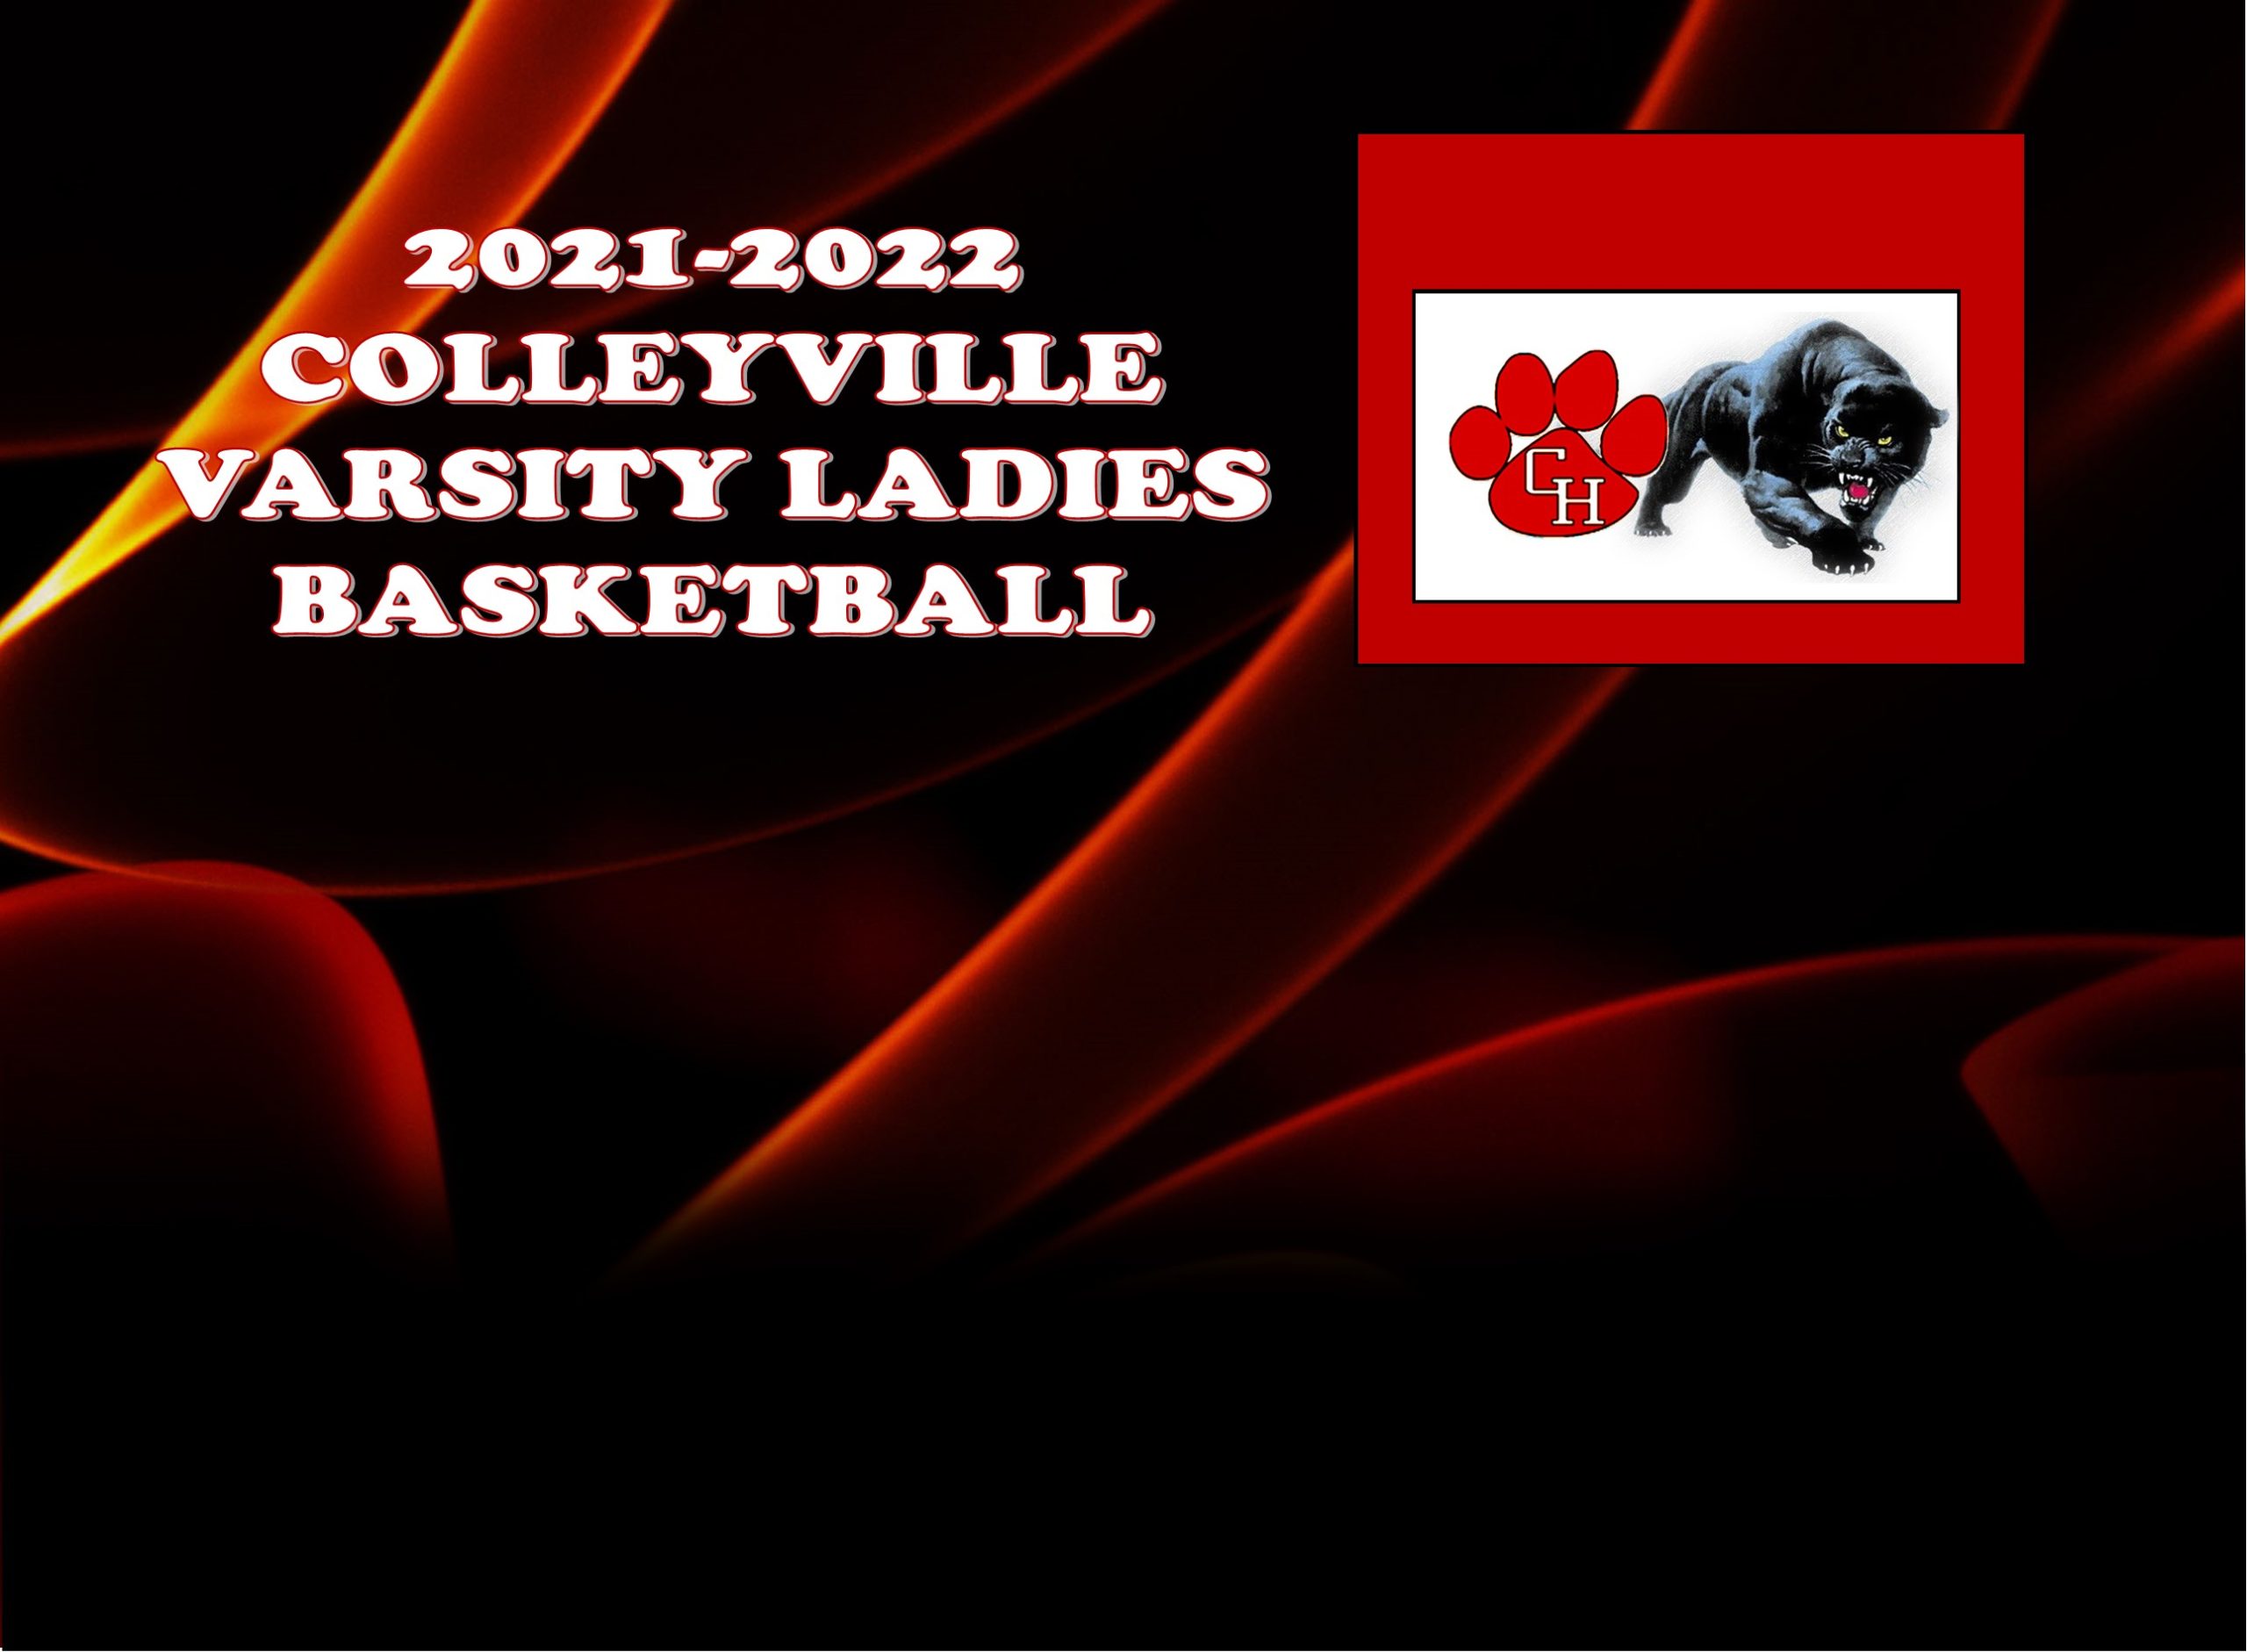 Colleyville Basketball: Colleyville Lady Panthers Up Ended by Coppell Lady Cowboys 33-72